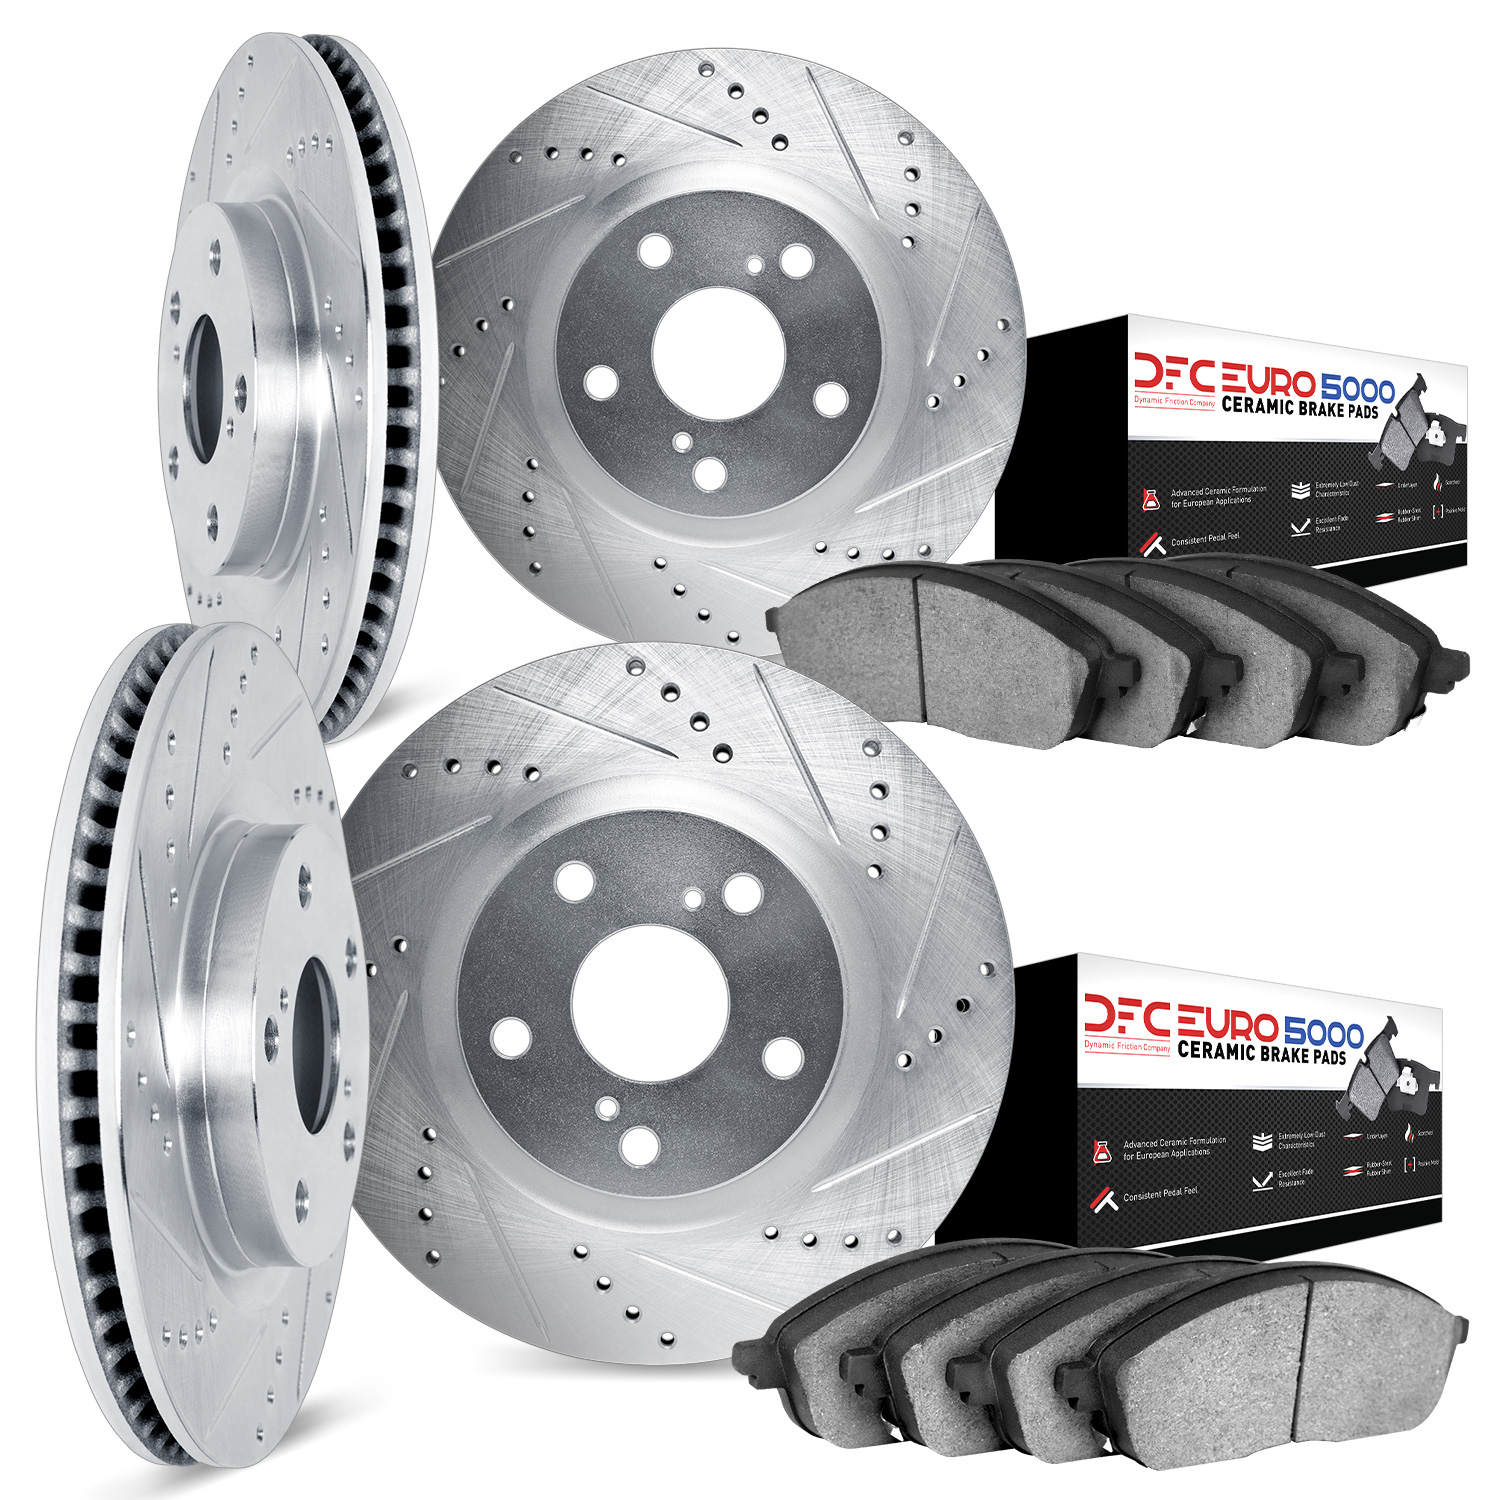 7604-31010 Drilled/Slotted Brake Rotors w/5000 Euro Ceramic Brake Pads Kit [Silver], 1997-2000 BMW, Position: Front and Rear